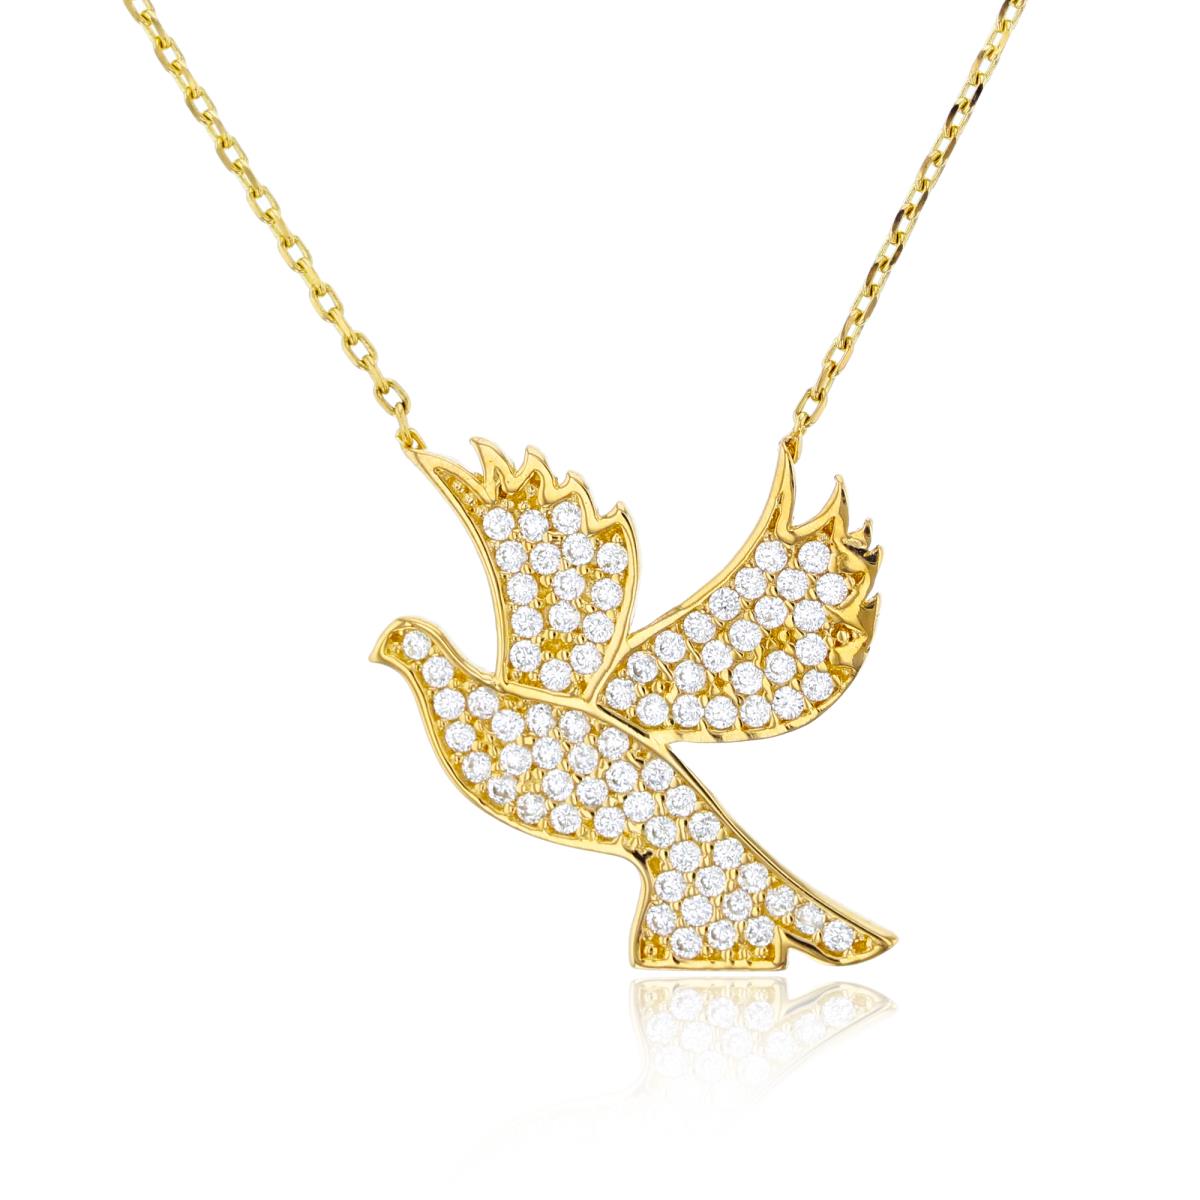 10K Yellow Gold Rnd CZ Micropaved "Dove" 17+1"Necklace